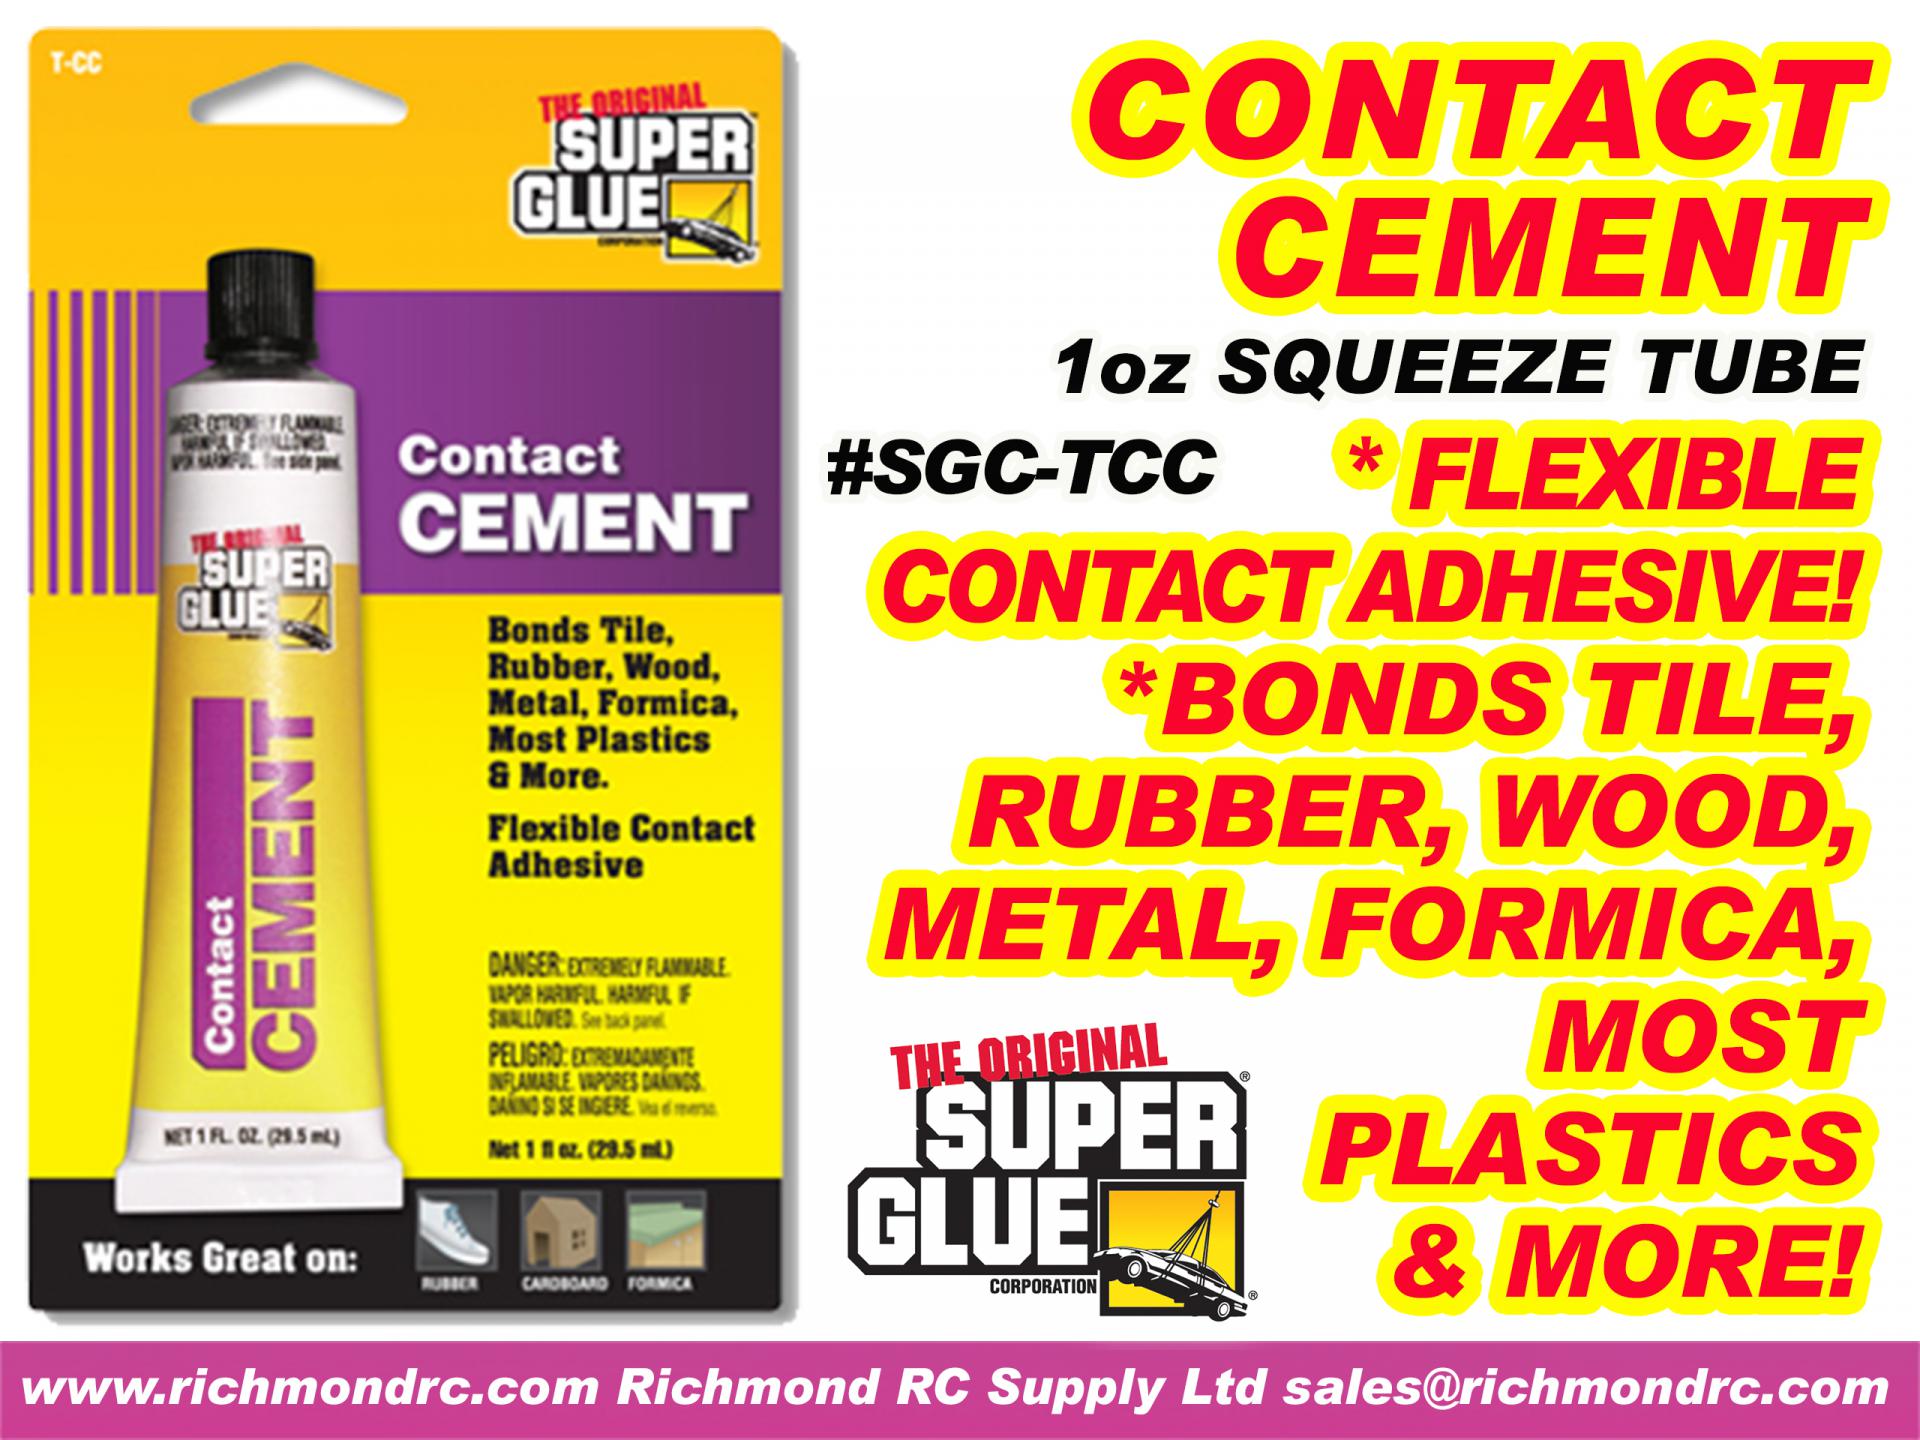 SUPER GLUE CORP - CONTACT CEMENT 29.5ml 1oz pac-prices